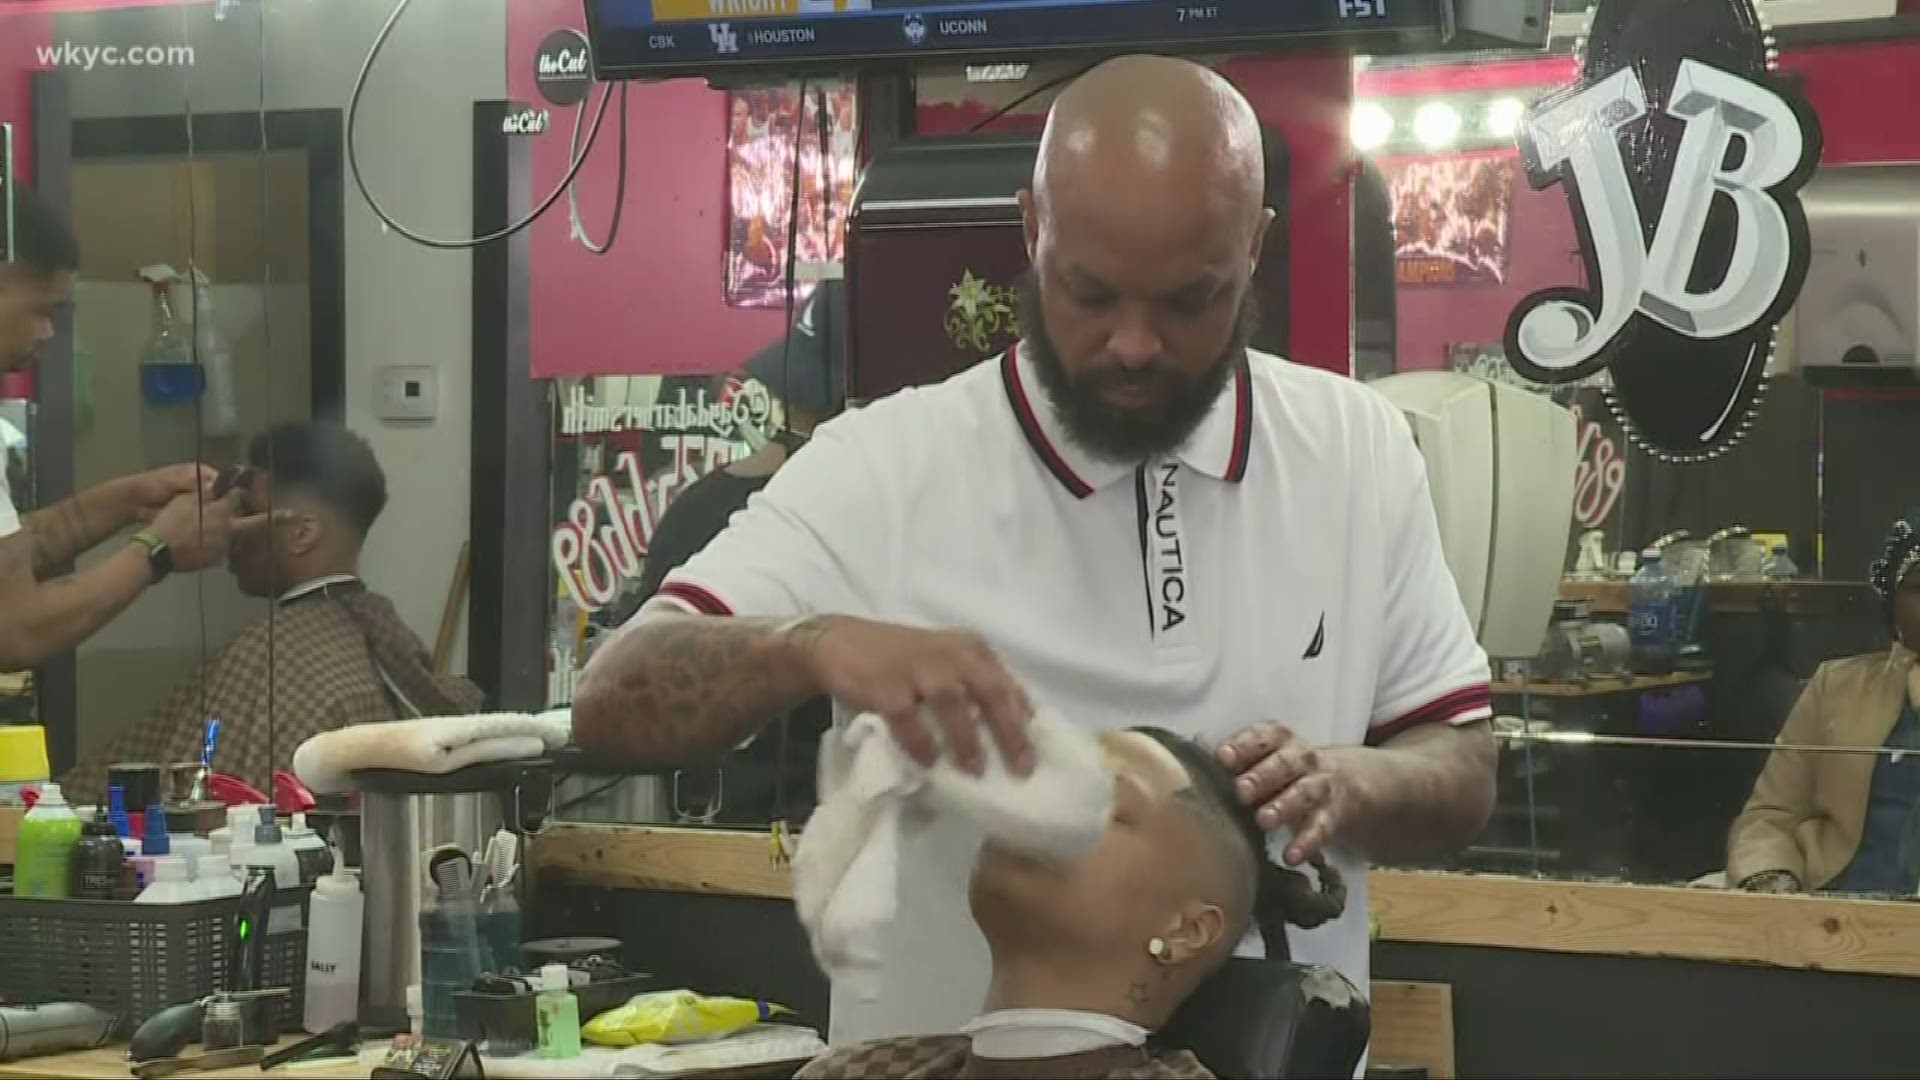 Getting a haircut, a color & style, or getting your nails done is going to have to wait, thanks to coronavirus. Carl Bachtel reports.